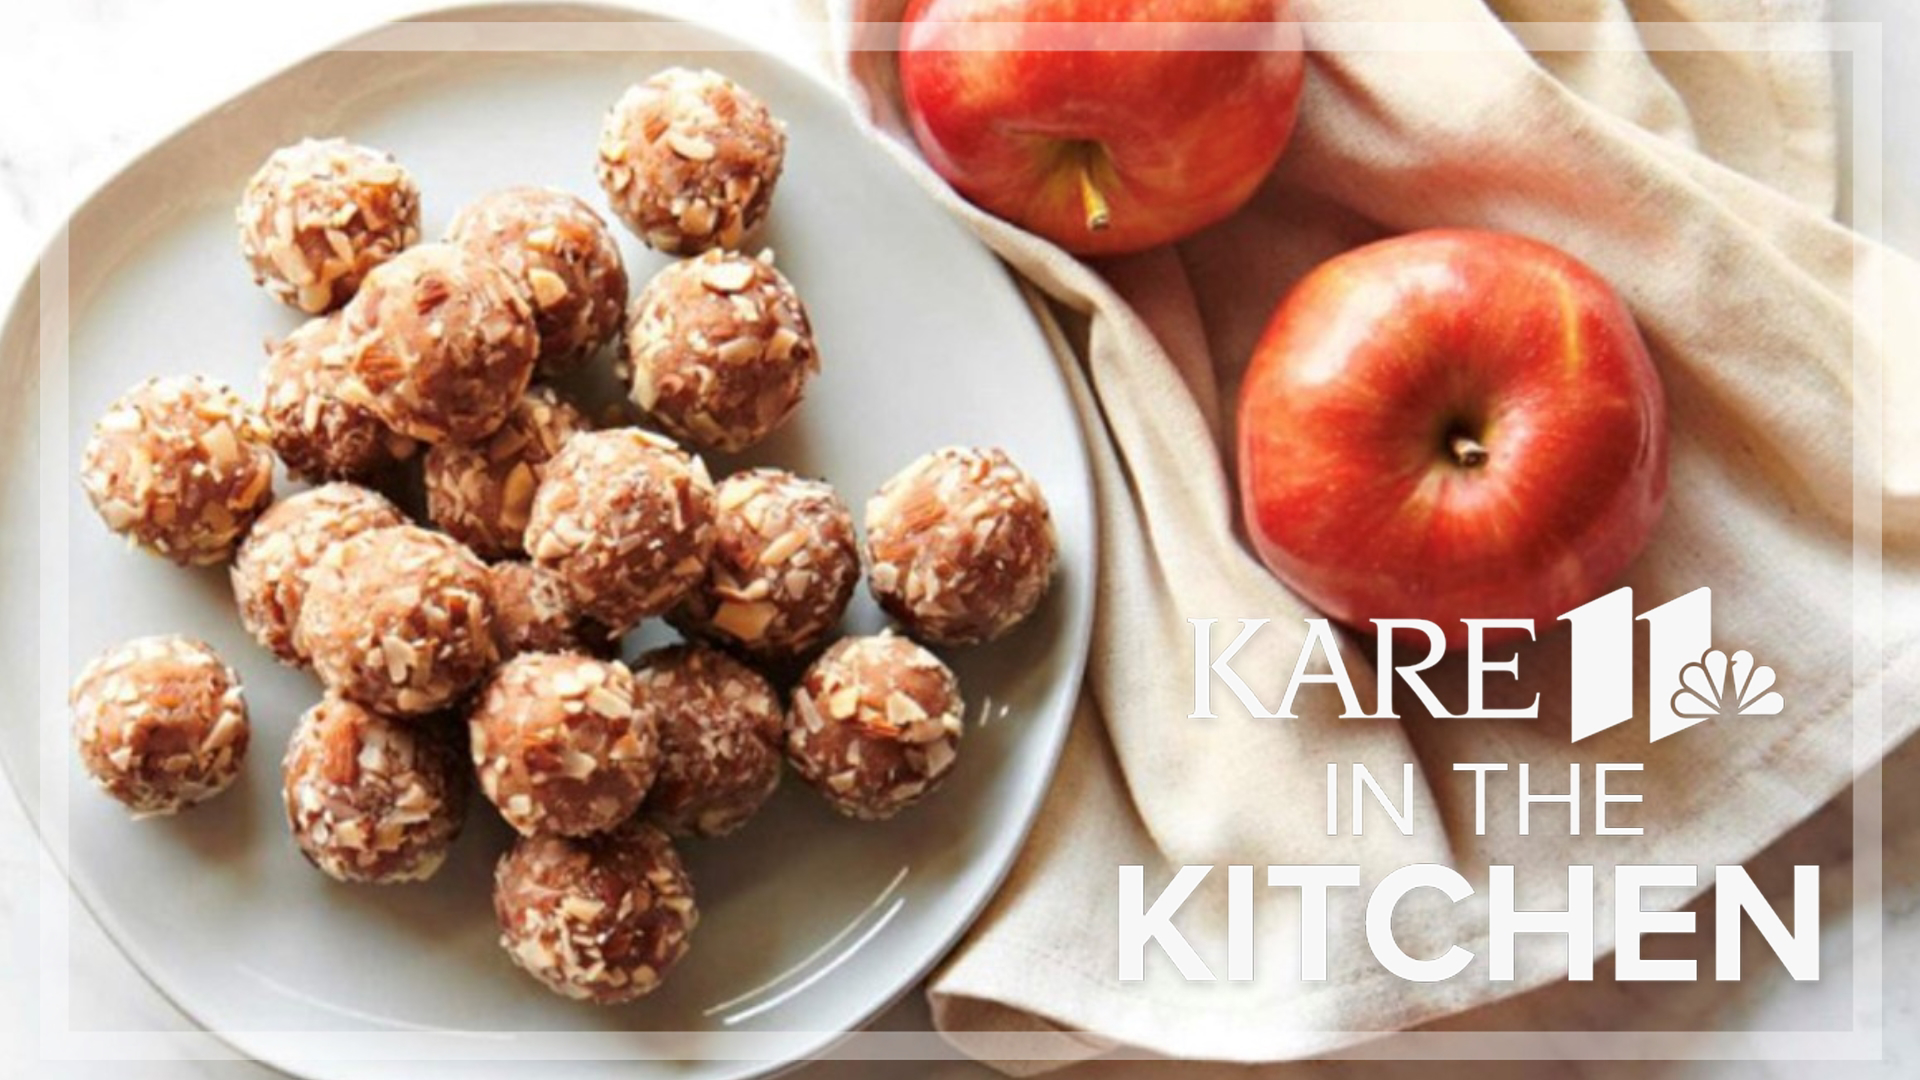 Life Time registered dietitian Samantha McKinney joins KARE in the Kitchen to share her recipes for some healthy snacks using the Minnesota fall favorites.